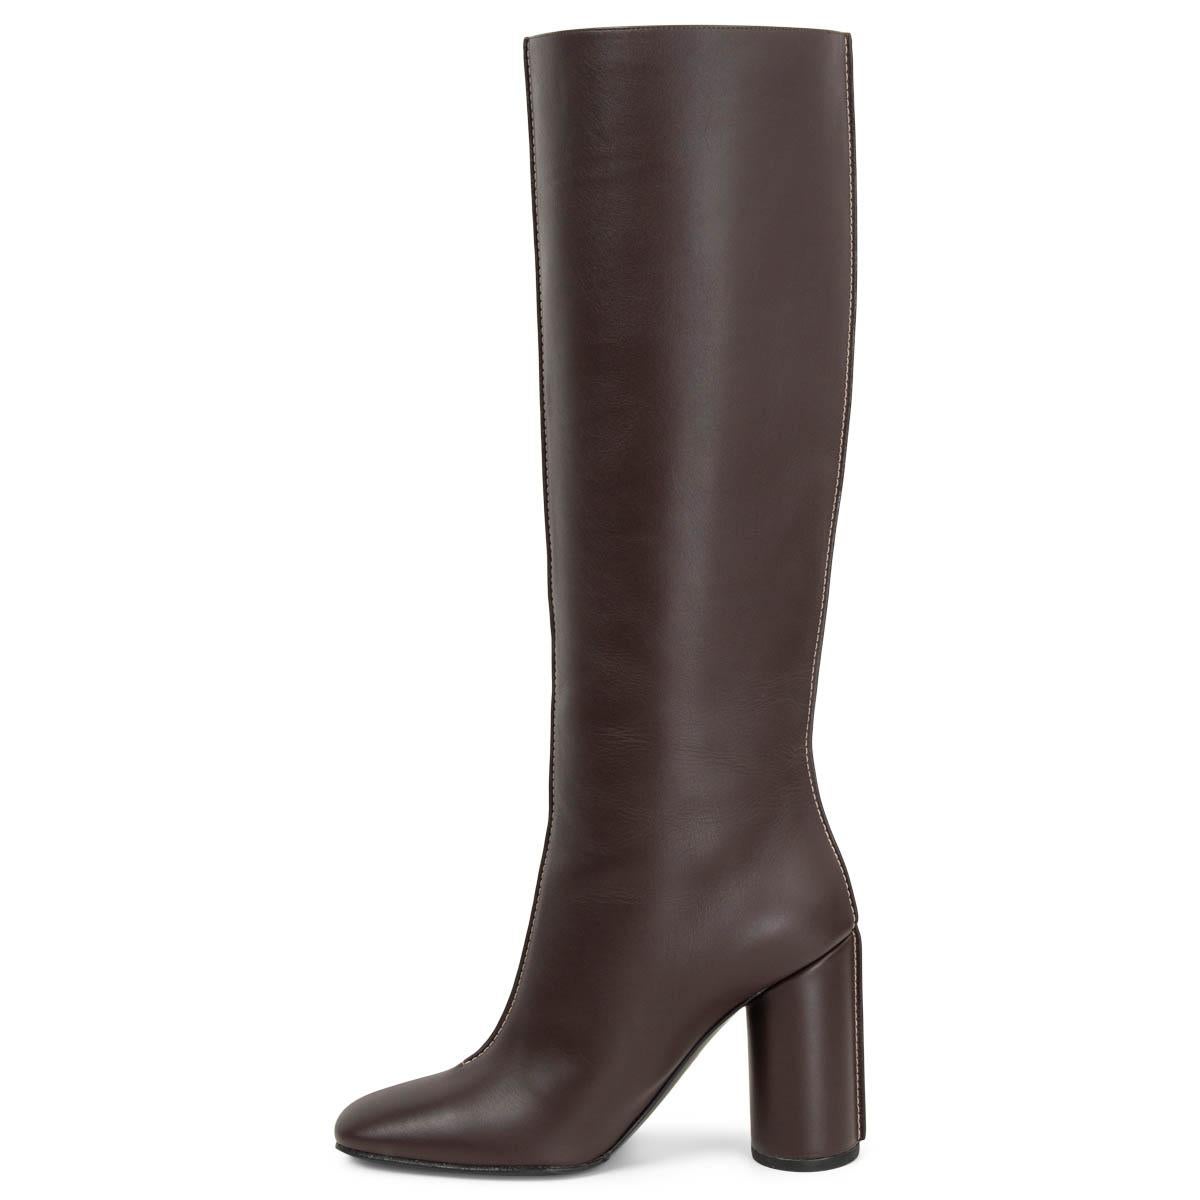 brown knee high boots sale